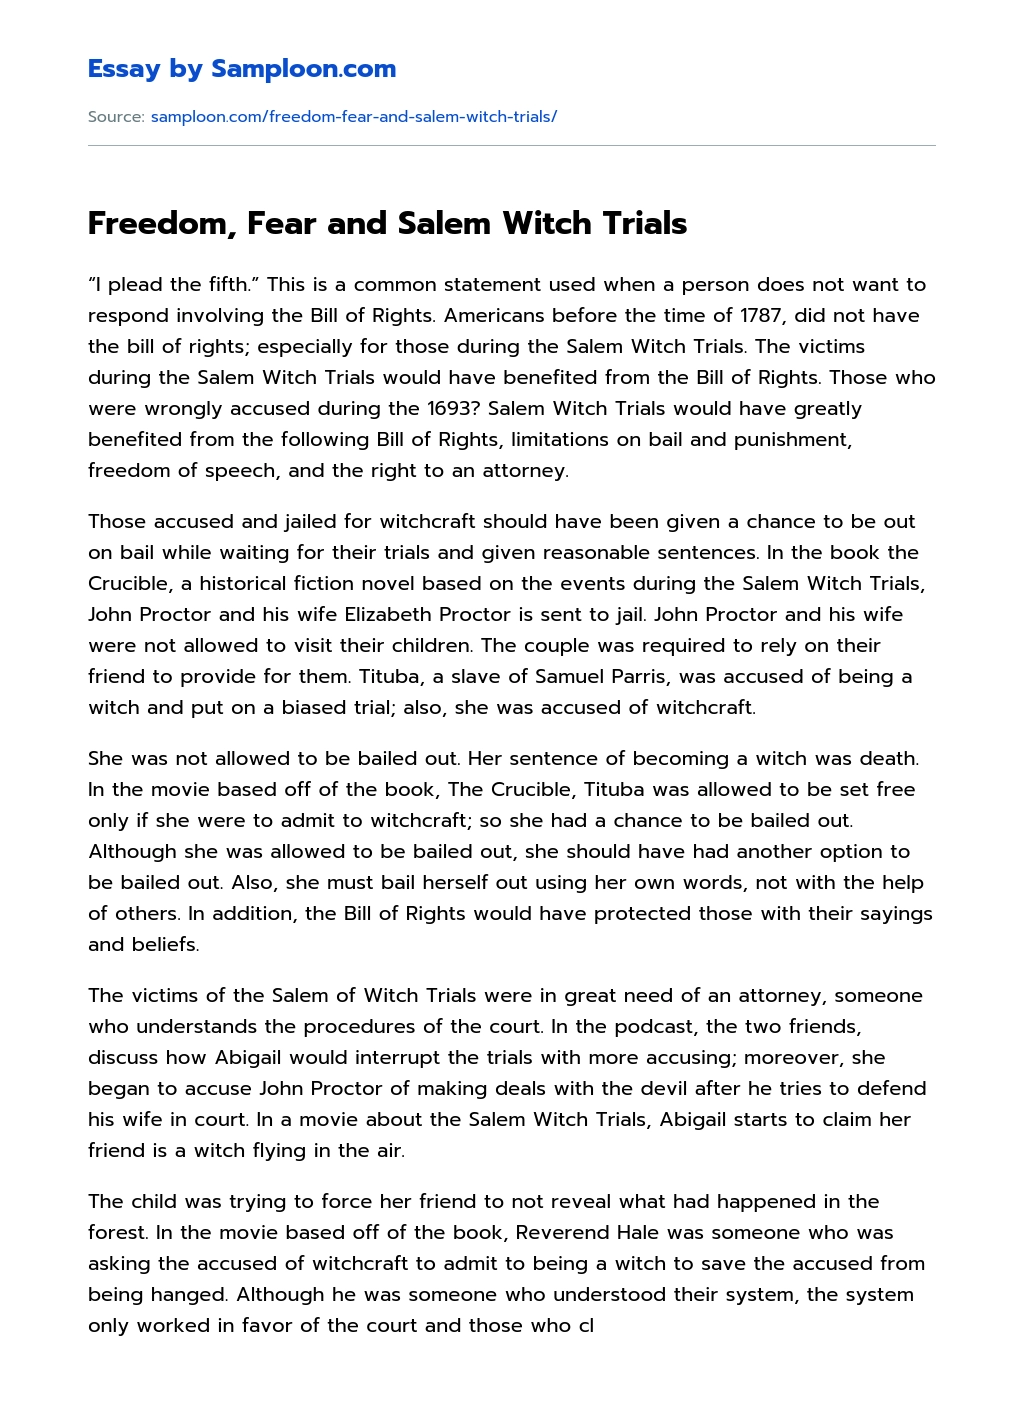 Freedom, Fear and Salem Witch Trials essay